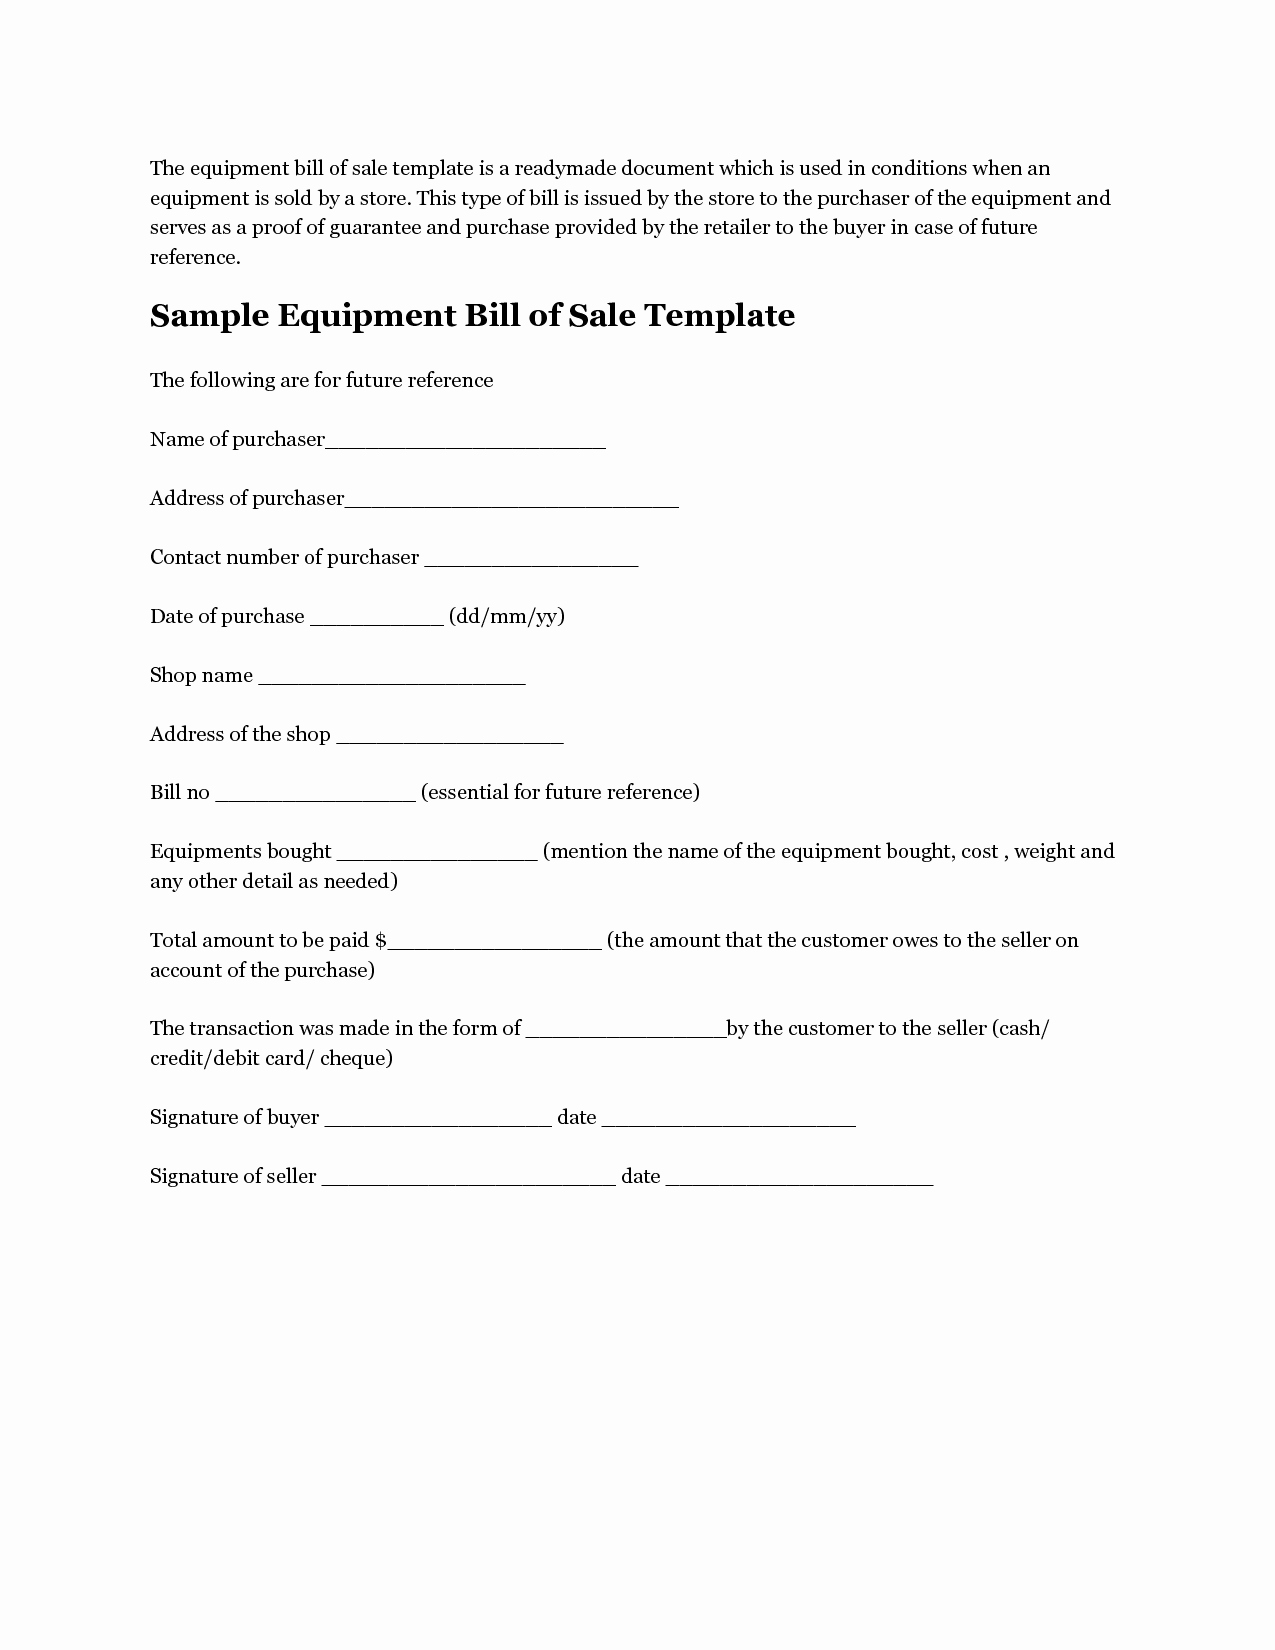 Free Template Bill Of Sale Fresh Free Printable Equipment Bill Sale Template form Generic